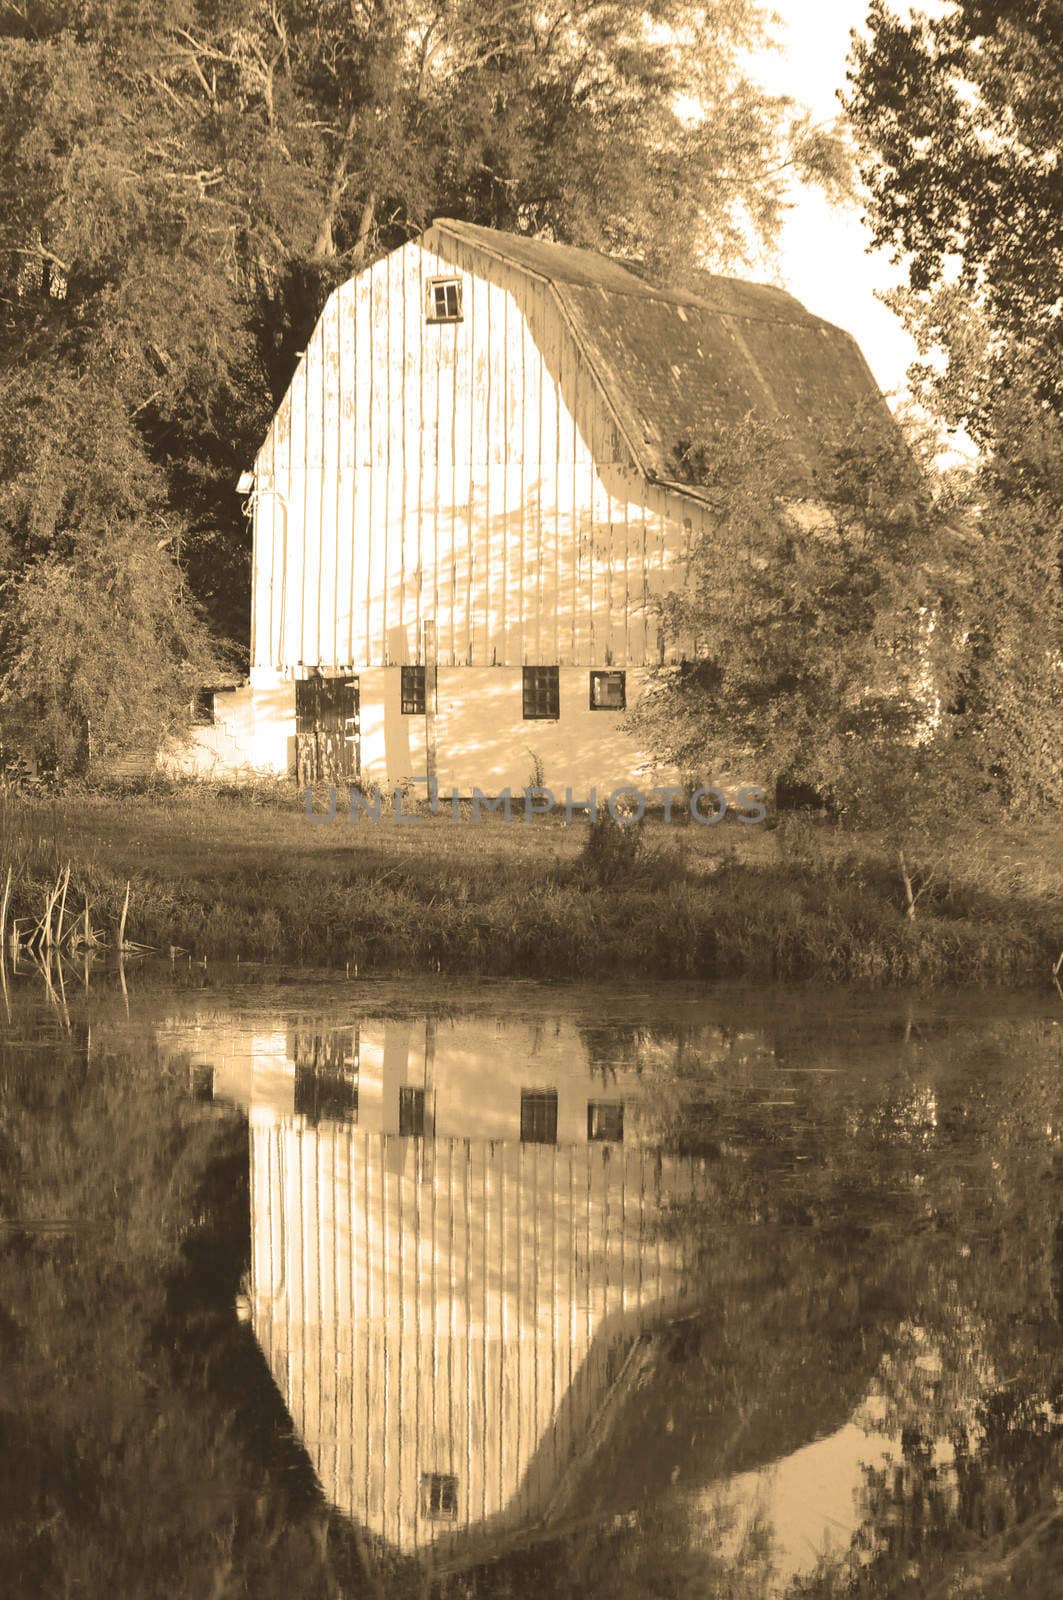 sepia barn reflecting in a pond in the countryside by ftlaudgirl